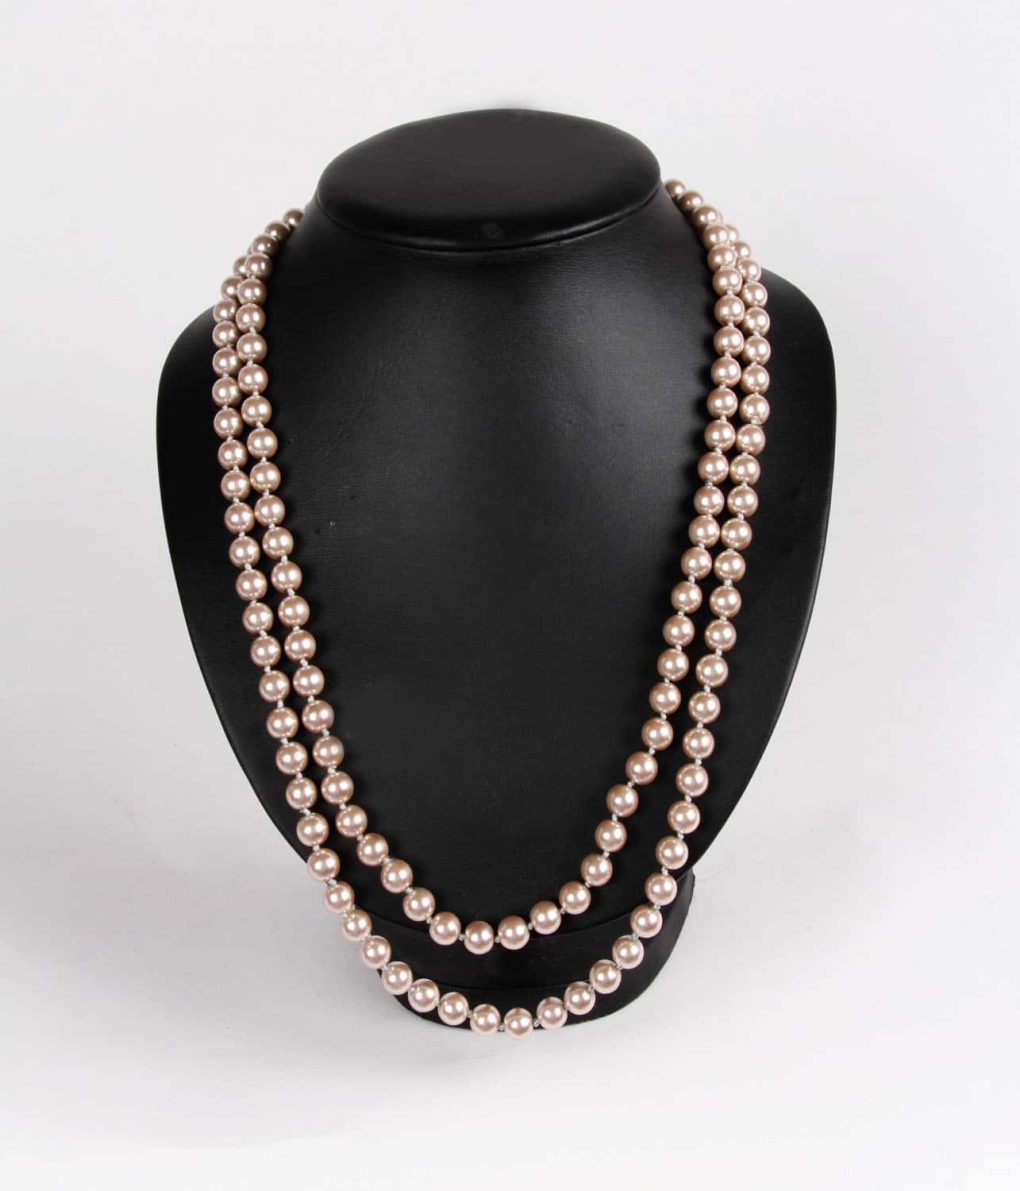 Alila Long Chain of Genuine Peach Pearls Necklace